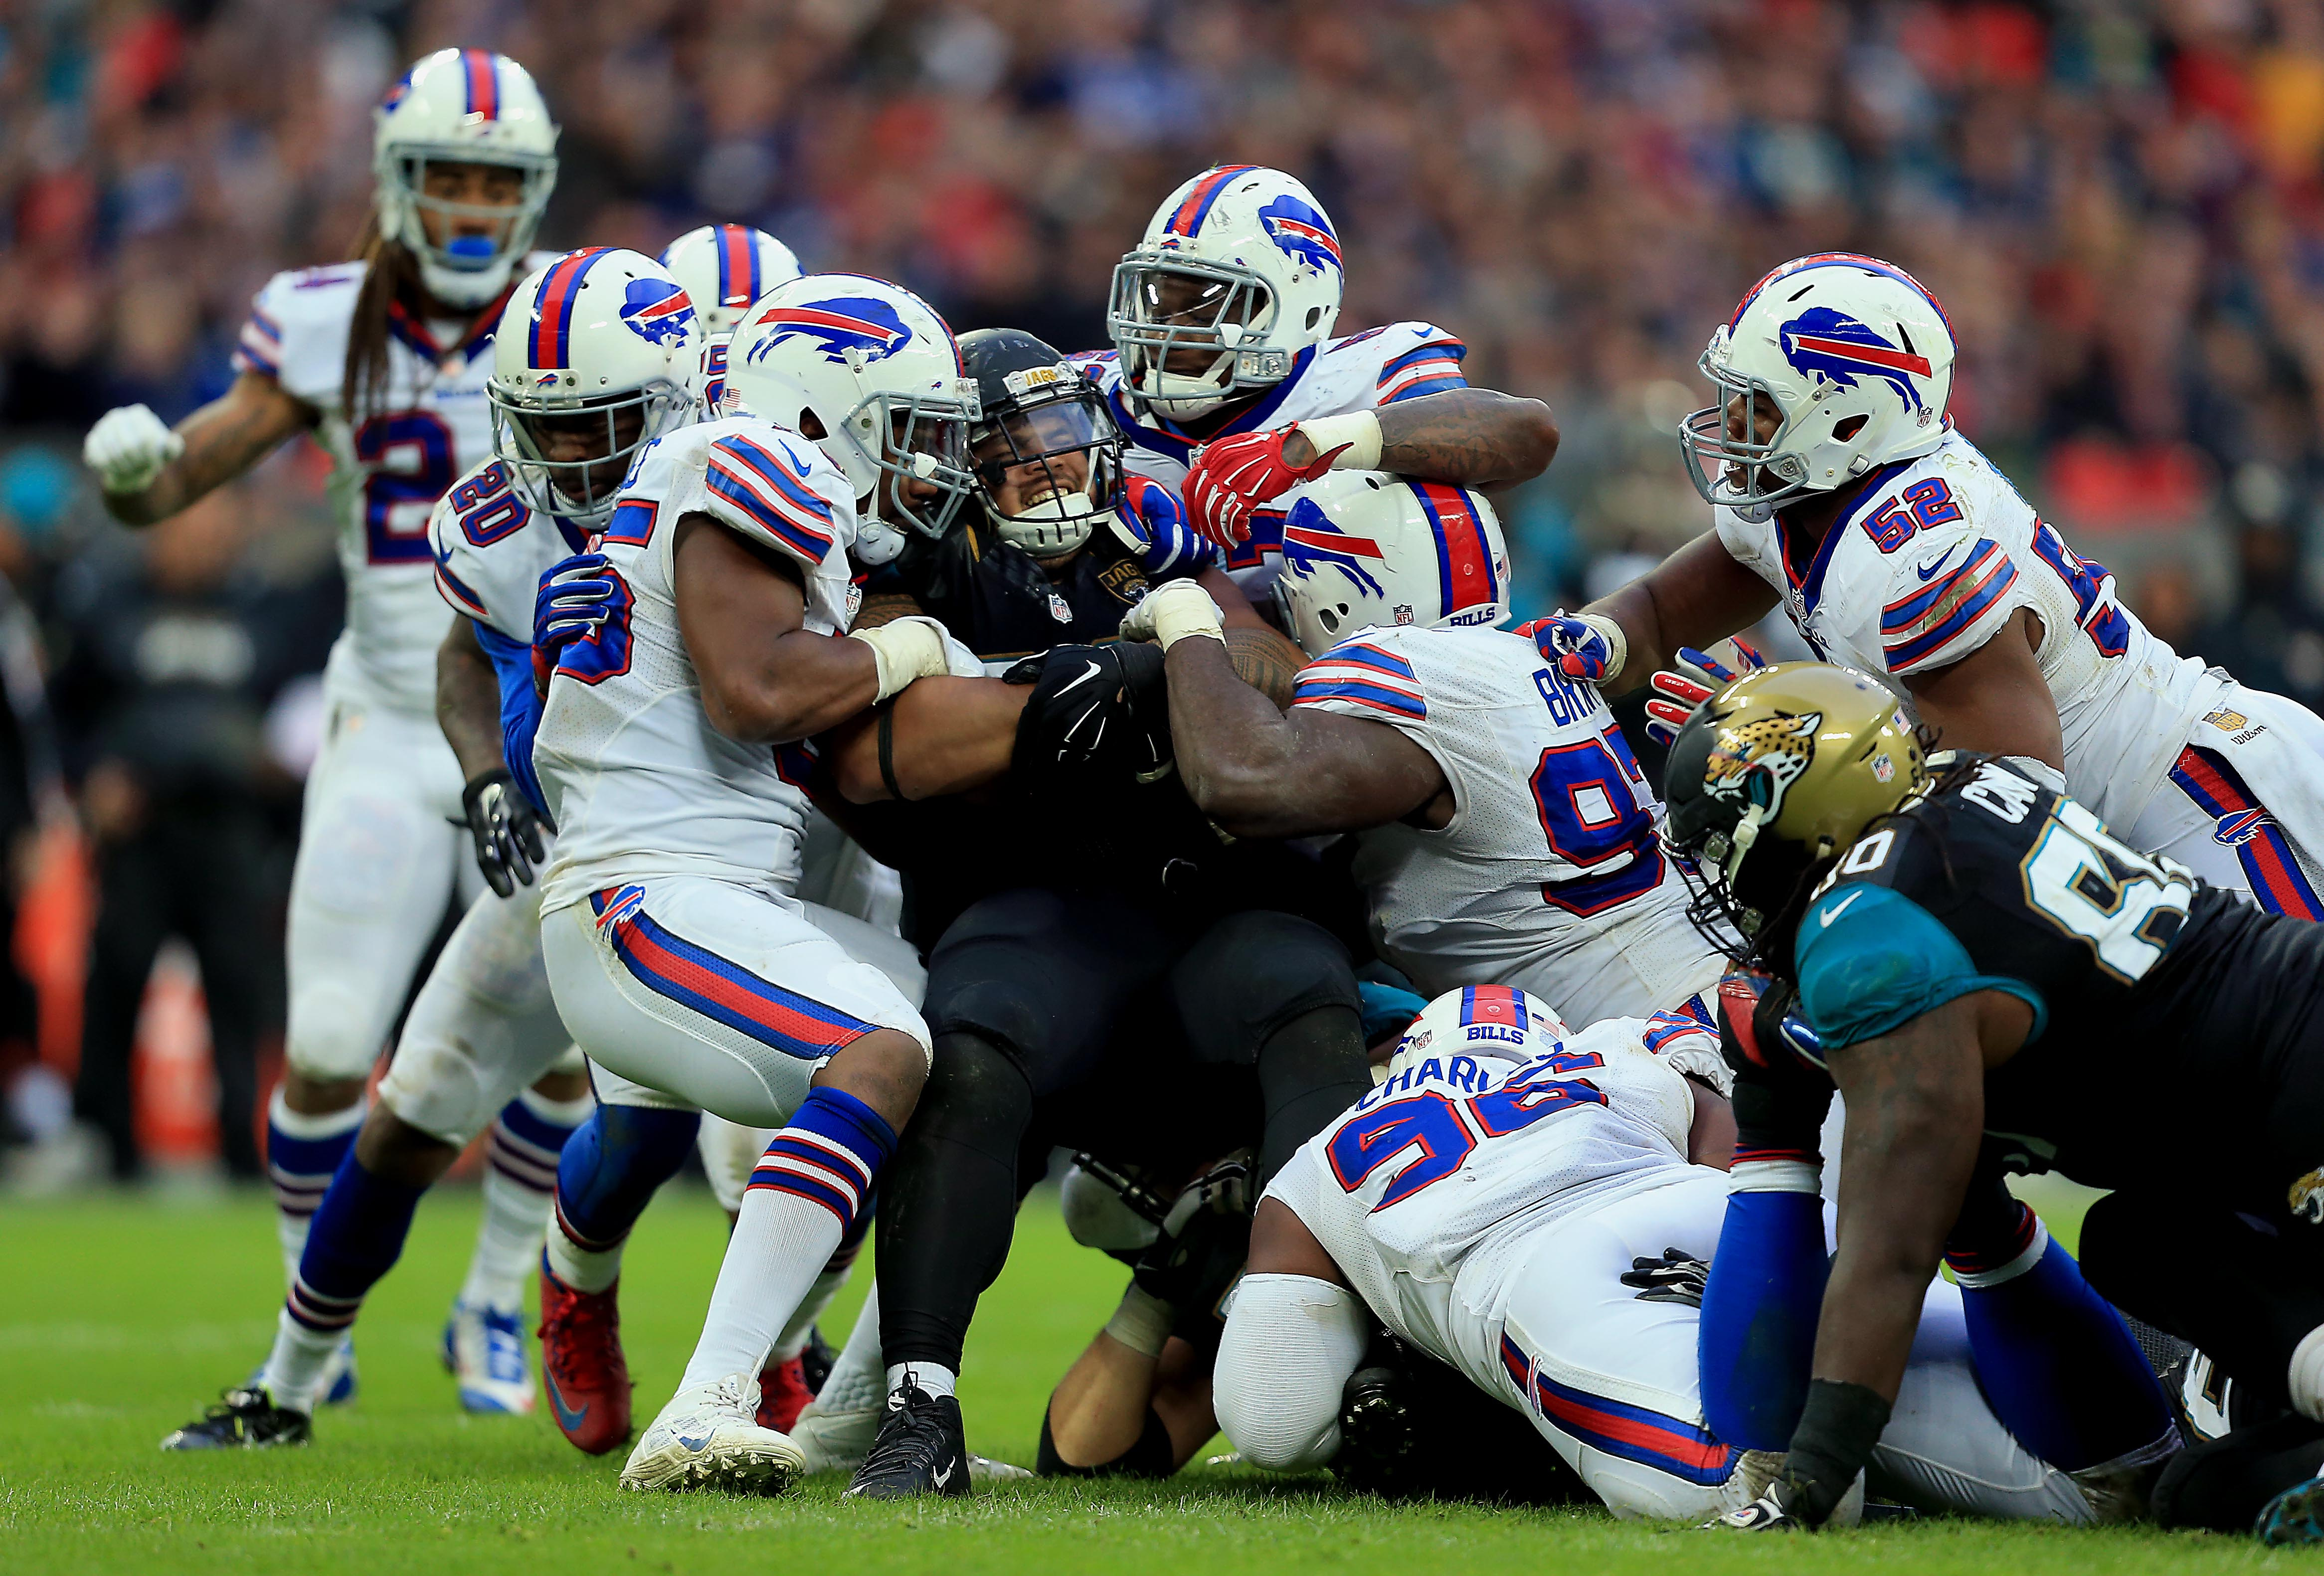 Jacksonville Jaguars' Tyson Alualu (#93) is tackled during an NFL football game against the Buffalo Bills on Oct. 25, 2015 at Wembley Stadium in London. (Stephen Pond—Getty Images)